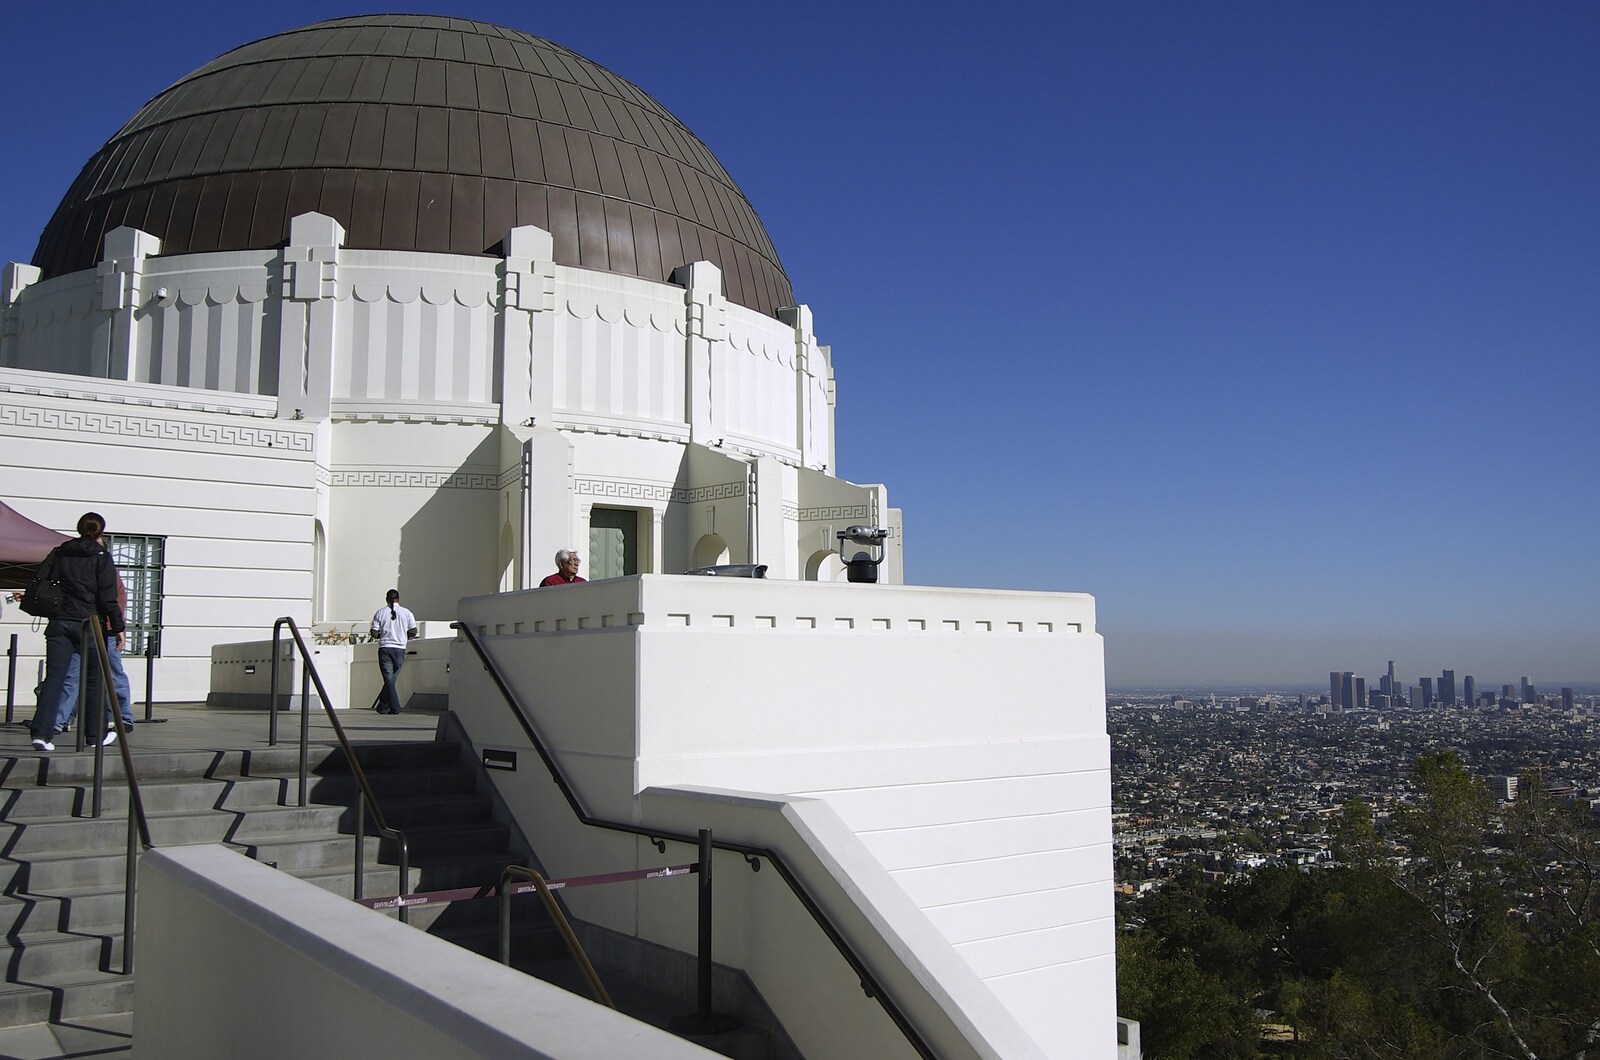 San Diego and Hollywood, California, US - 3rd March 2008: The Griffith Observatory and LA in the background